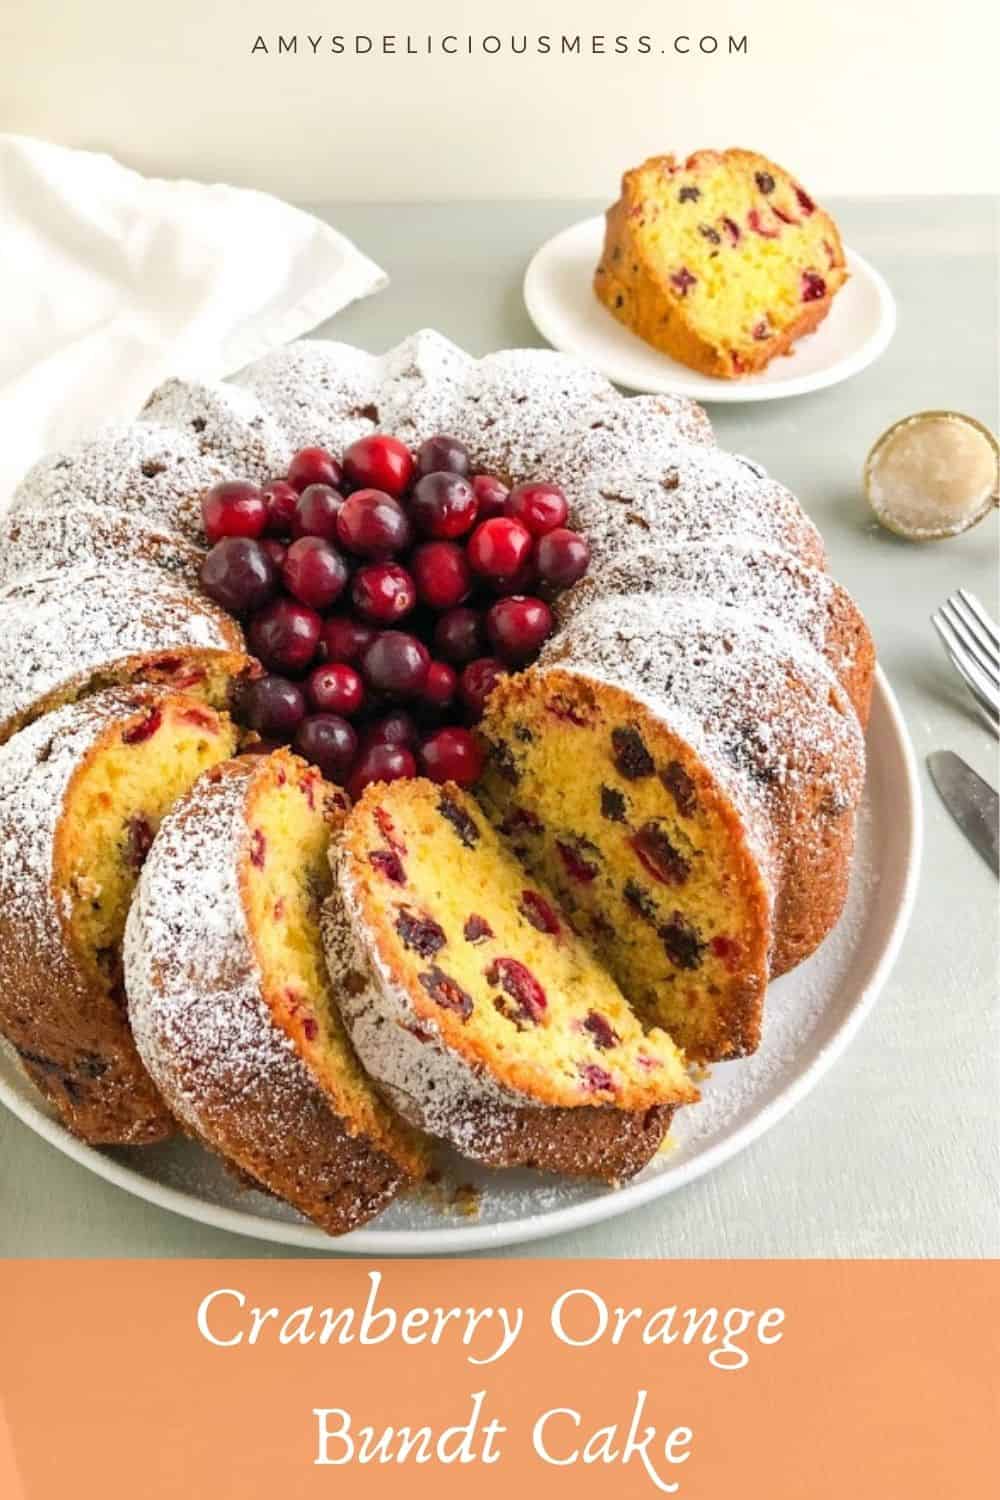 Whole bundt cake with a few slices dusted with powdered sugar on large round white plate with whole fresh cranberries in the center, next to white kitchen towel. One slice of cake on small round white plate and gold tea strainer with powdered sugar in the background.